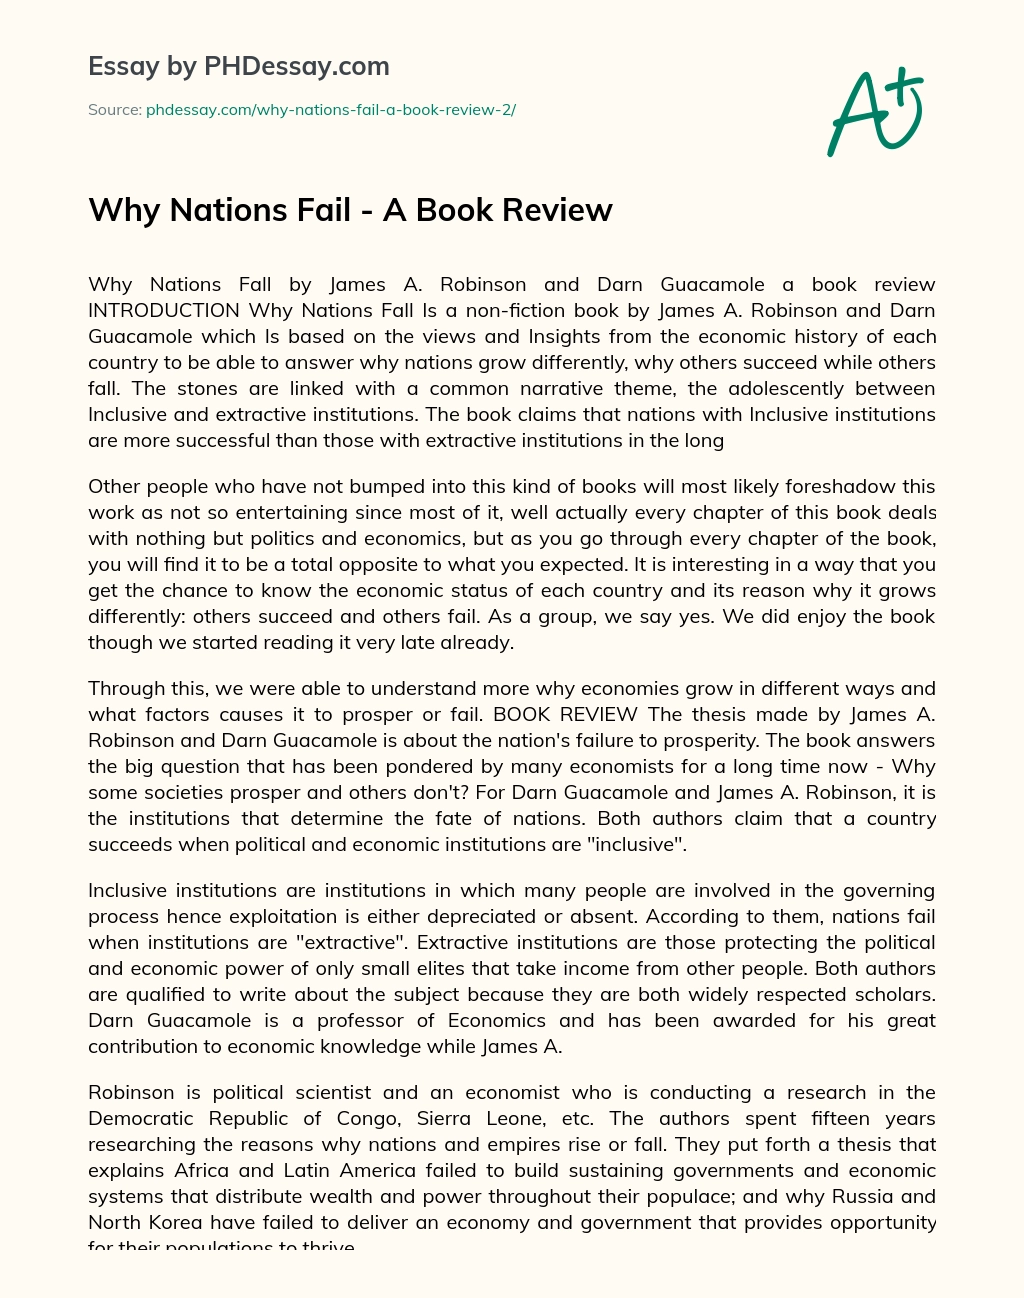 Why Nations Fail – A Book Review essay